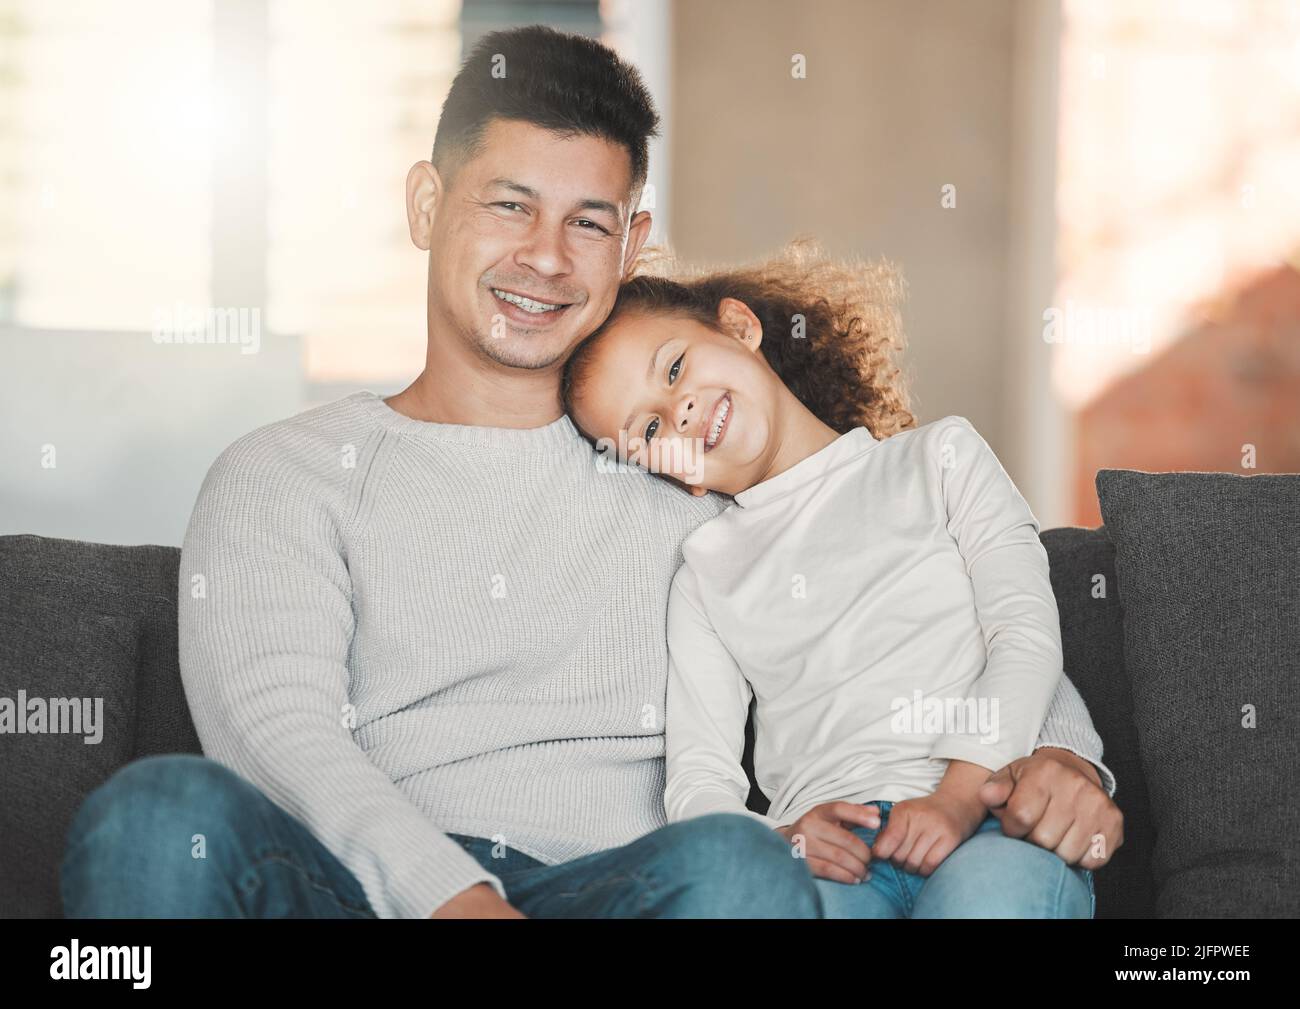 We are family. Shot of a father and daughter on the sofa at home. Stock Photo